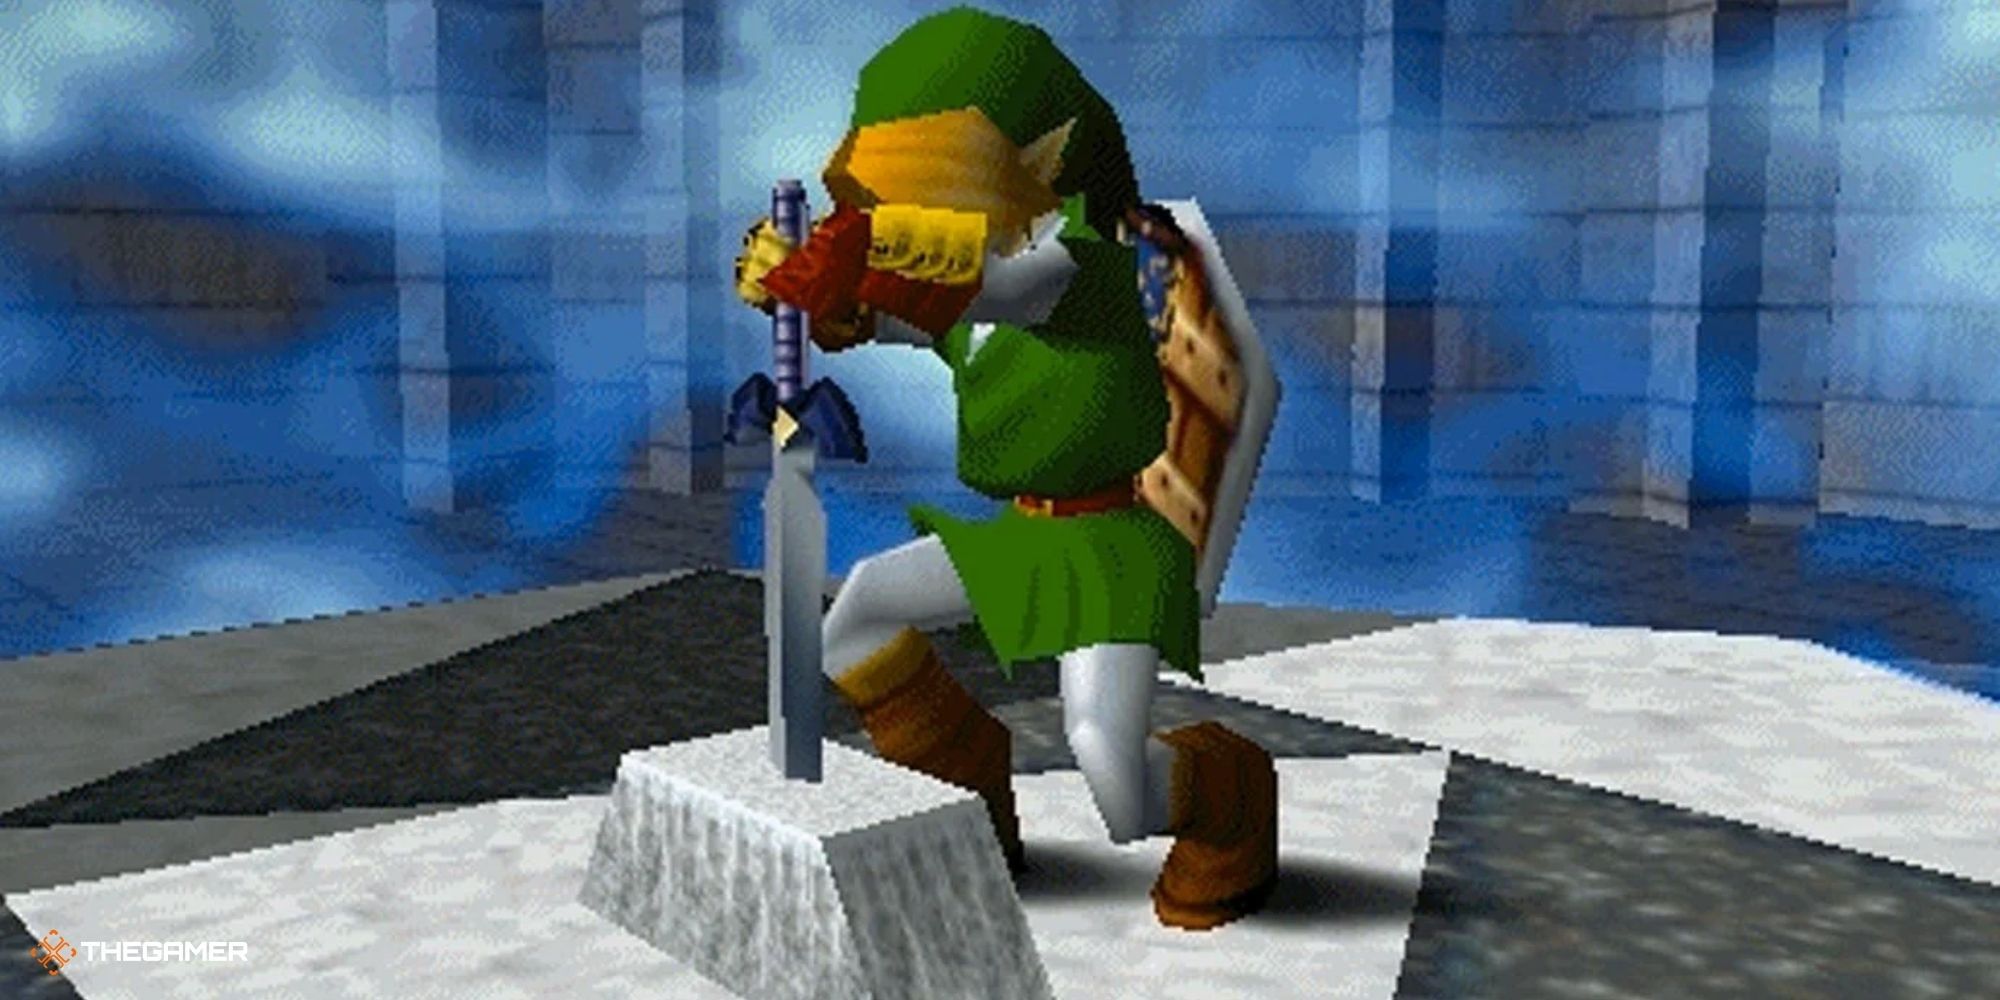 Ocarina of Time - Link with the Master Sword